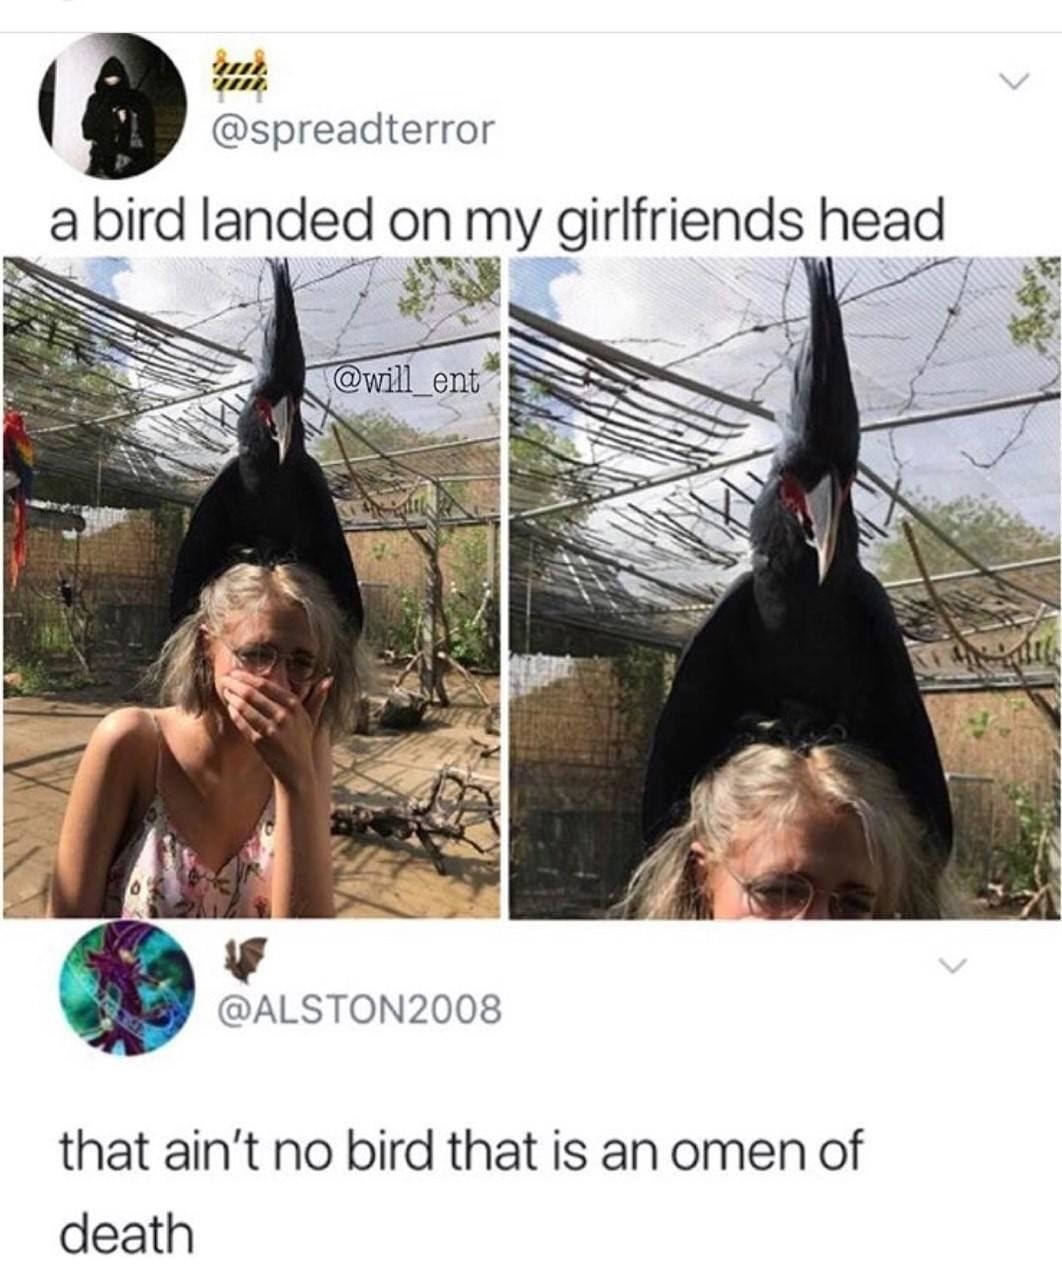 quoth the raven meme - a bird landed on my girlfriends head that ain't no bird that is an omen of death